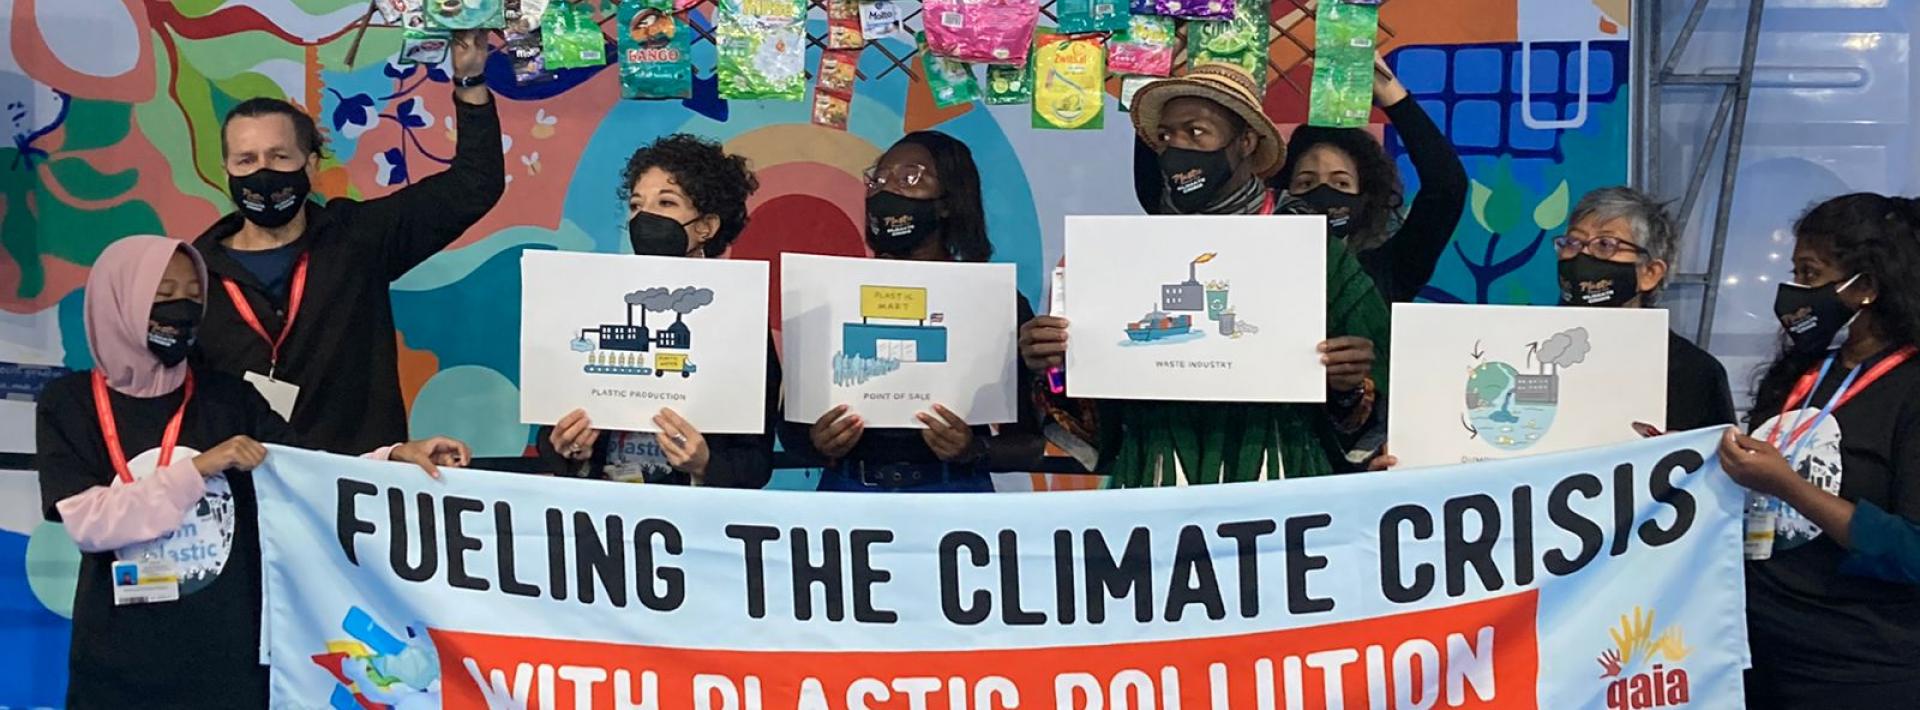 Activists Protest the Engagement of Plastic Producers at COP26. Credit: Rochimawati